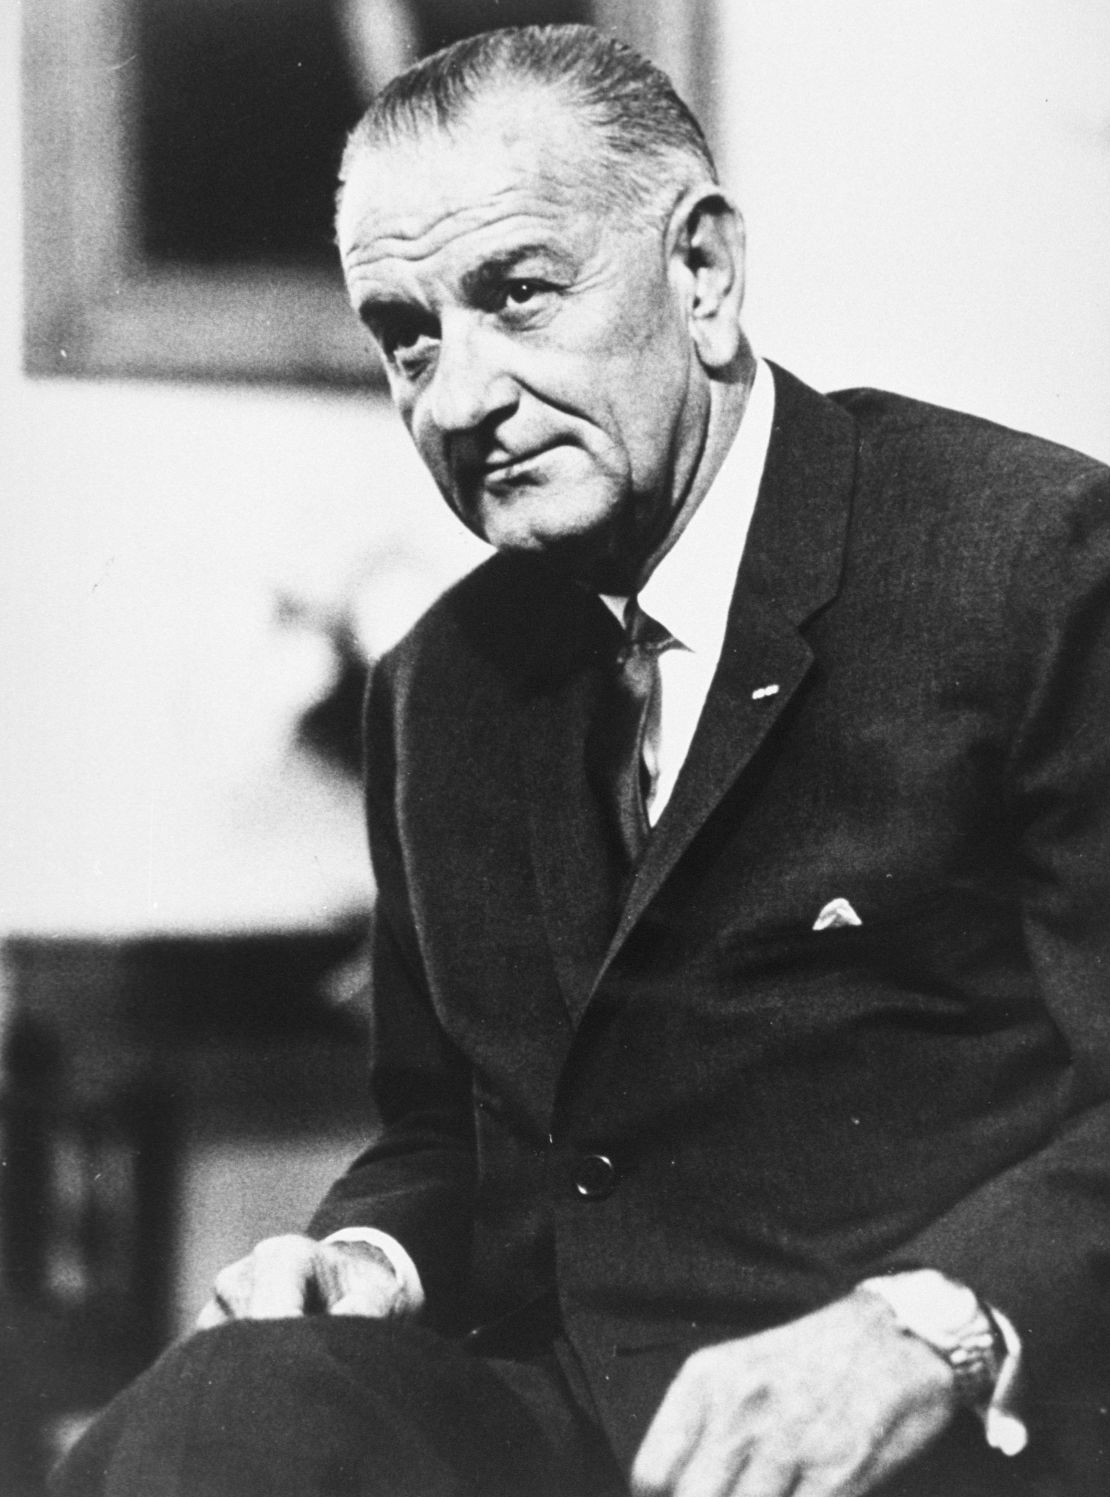 Lyndon B. Johnson prevailed in the 1964 presidential election, a contest dominated by race